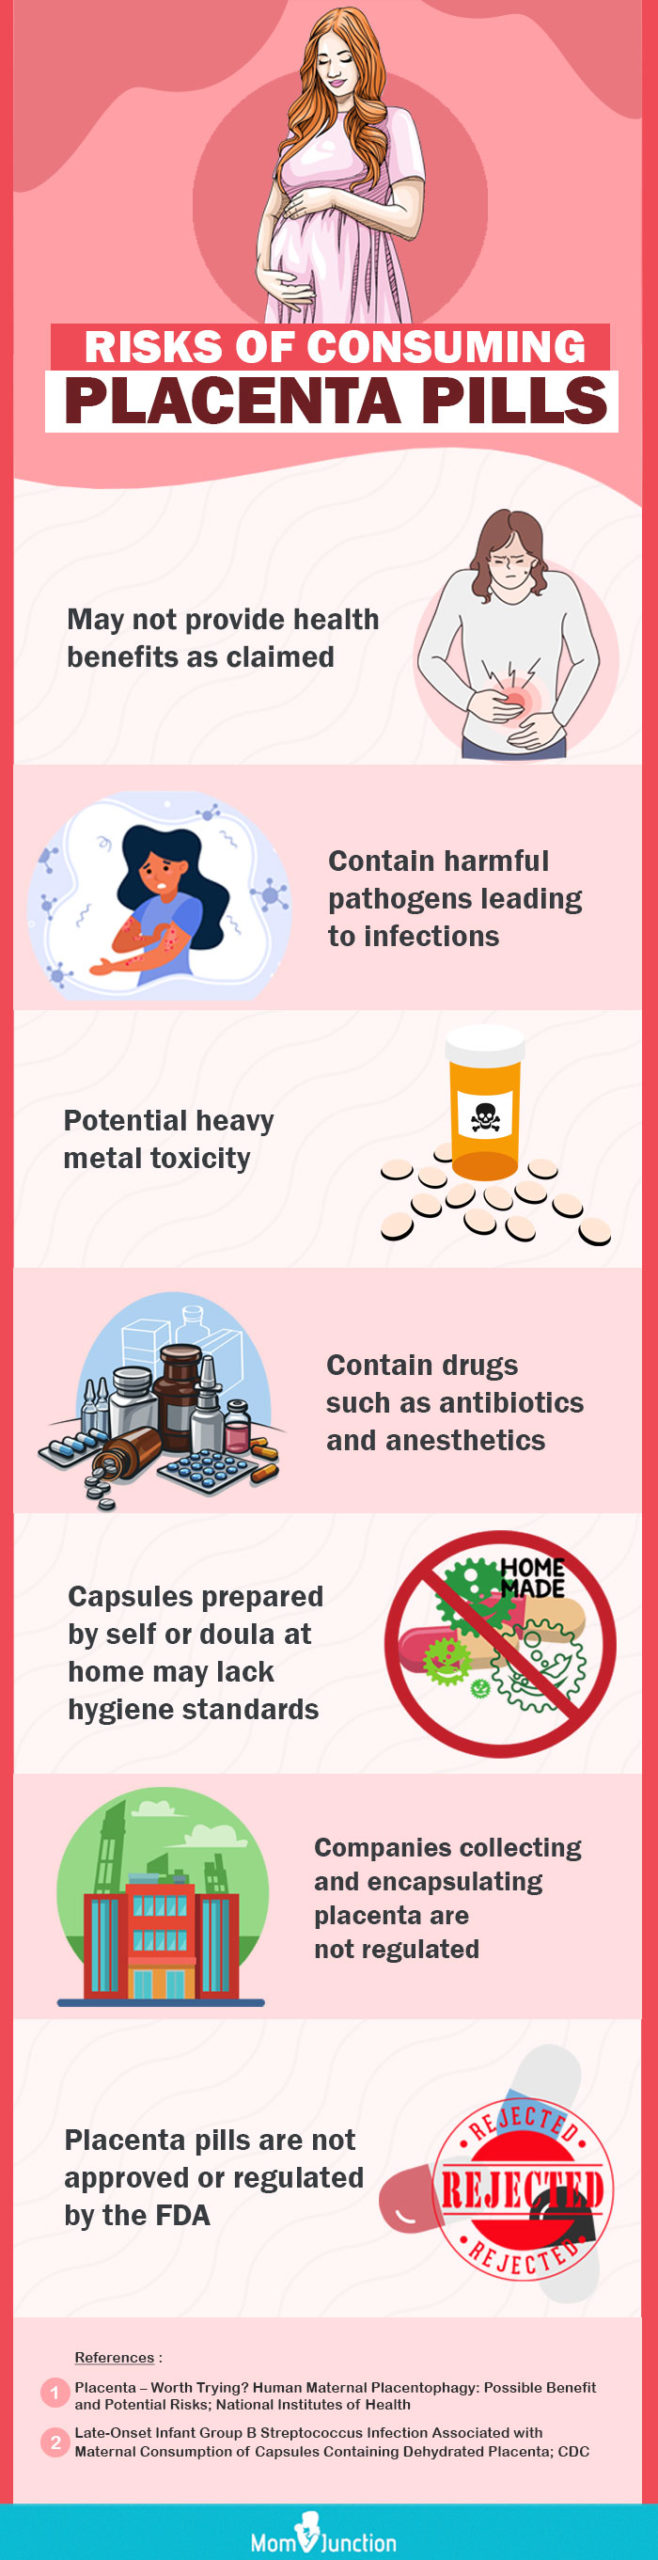 risks of consuming placenta pill (infographic)